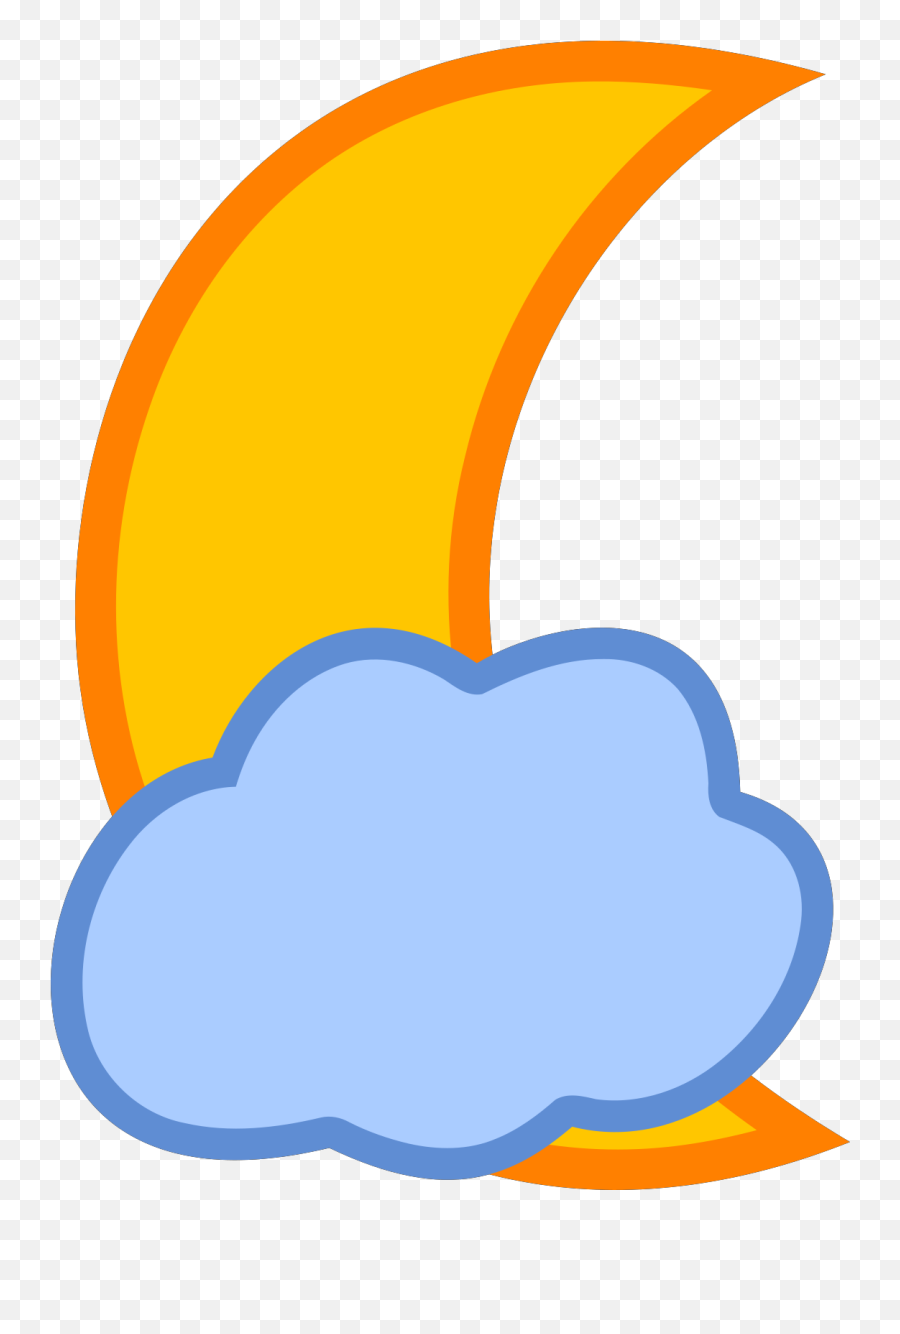 Cloud Covered Moon - Moon And Cloud Clipart Emoji,Clouds In Emojis For Desktop